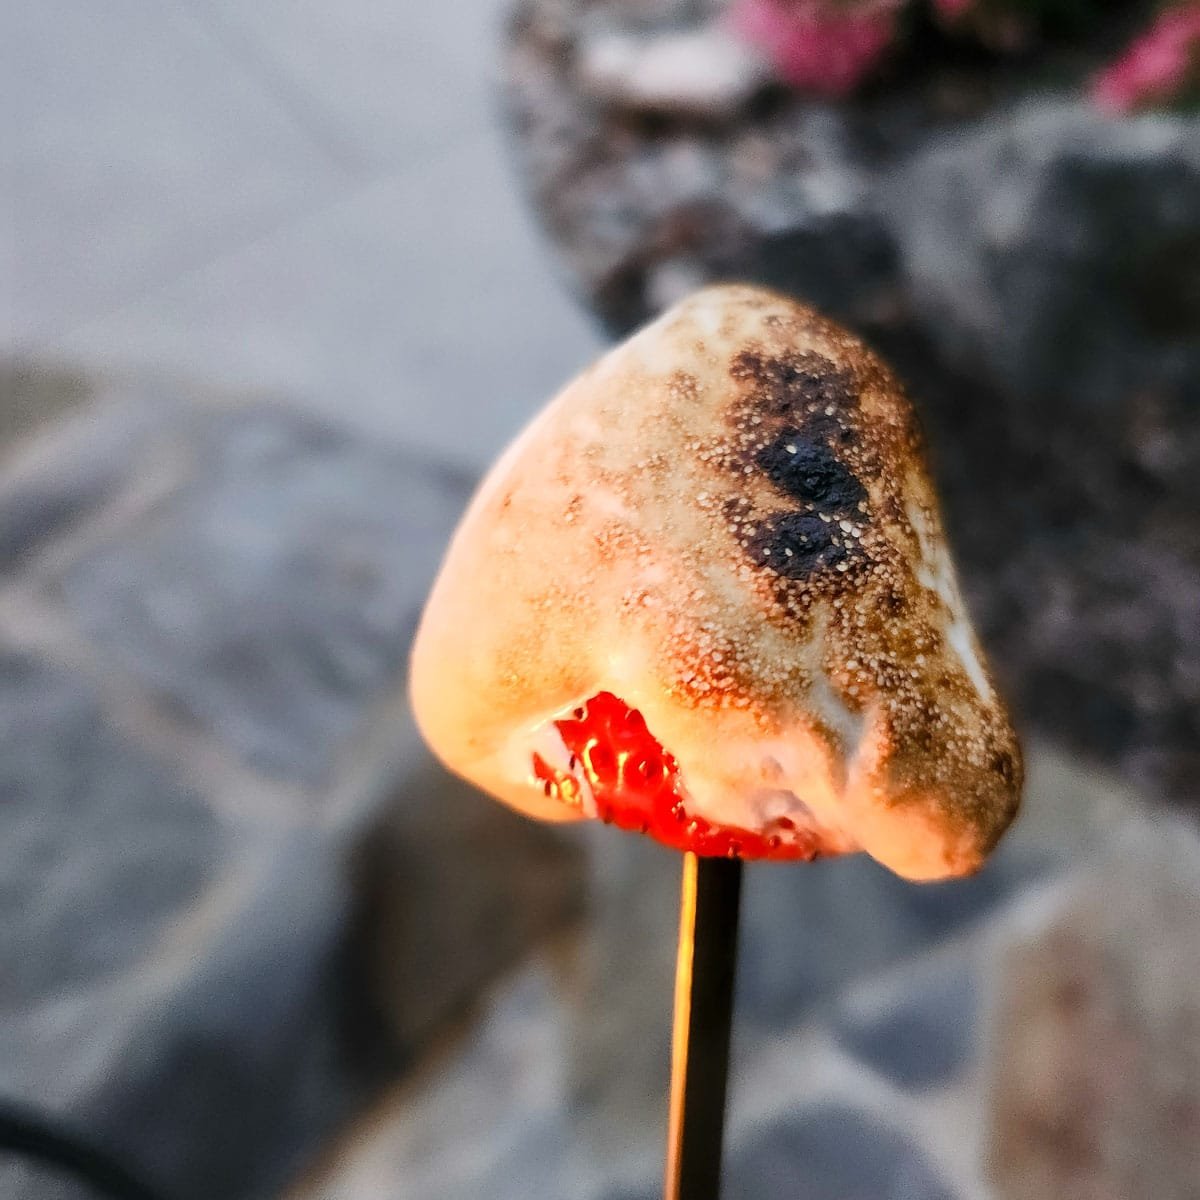 a strawberry on a skewer coated in marshmallow fluff